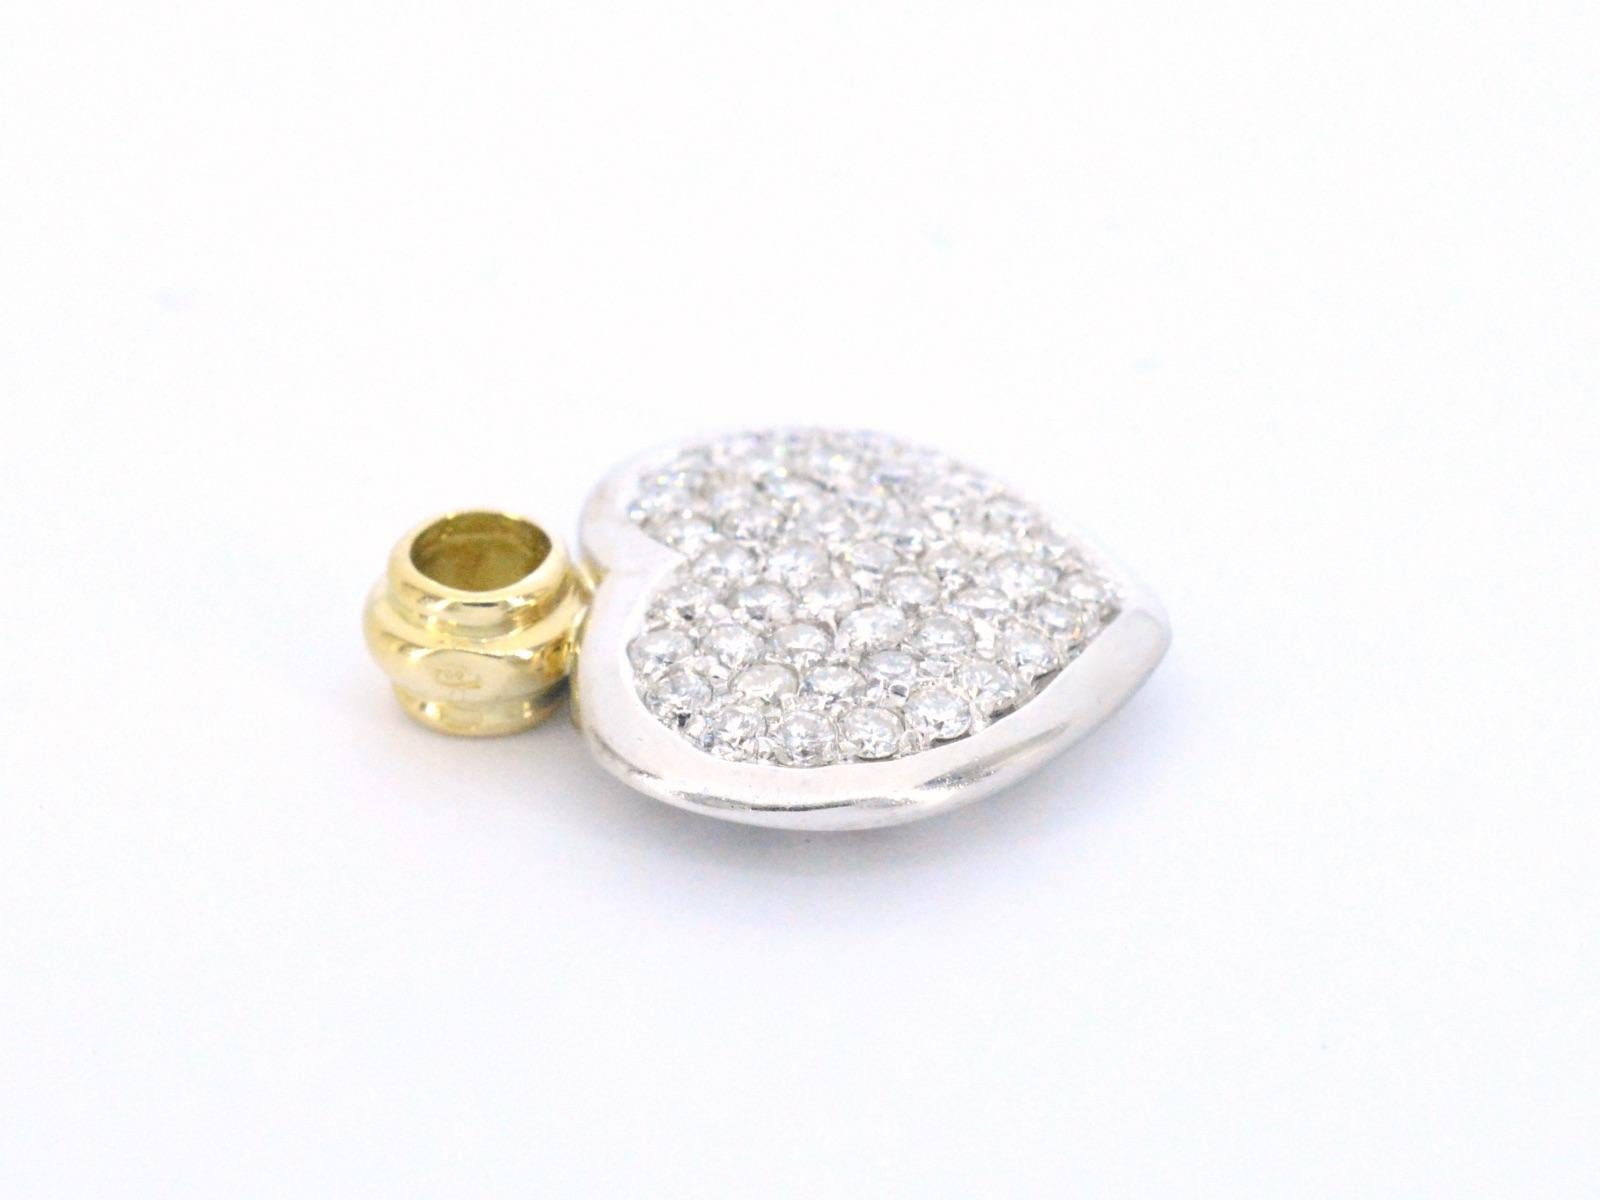 Diamonds: 48 pieces; Weight: 1.00 carat; Cut shape: Brilliant cut; Colour: F-G; Purity: VS; Quality: Good; Jewel: pendant/charm; Weight: 3.7 ounces; Dimensions: 2 x 1.5 cm; Hallmark: 18K gold ; Condition: Vintage; The quality has been taken from the